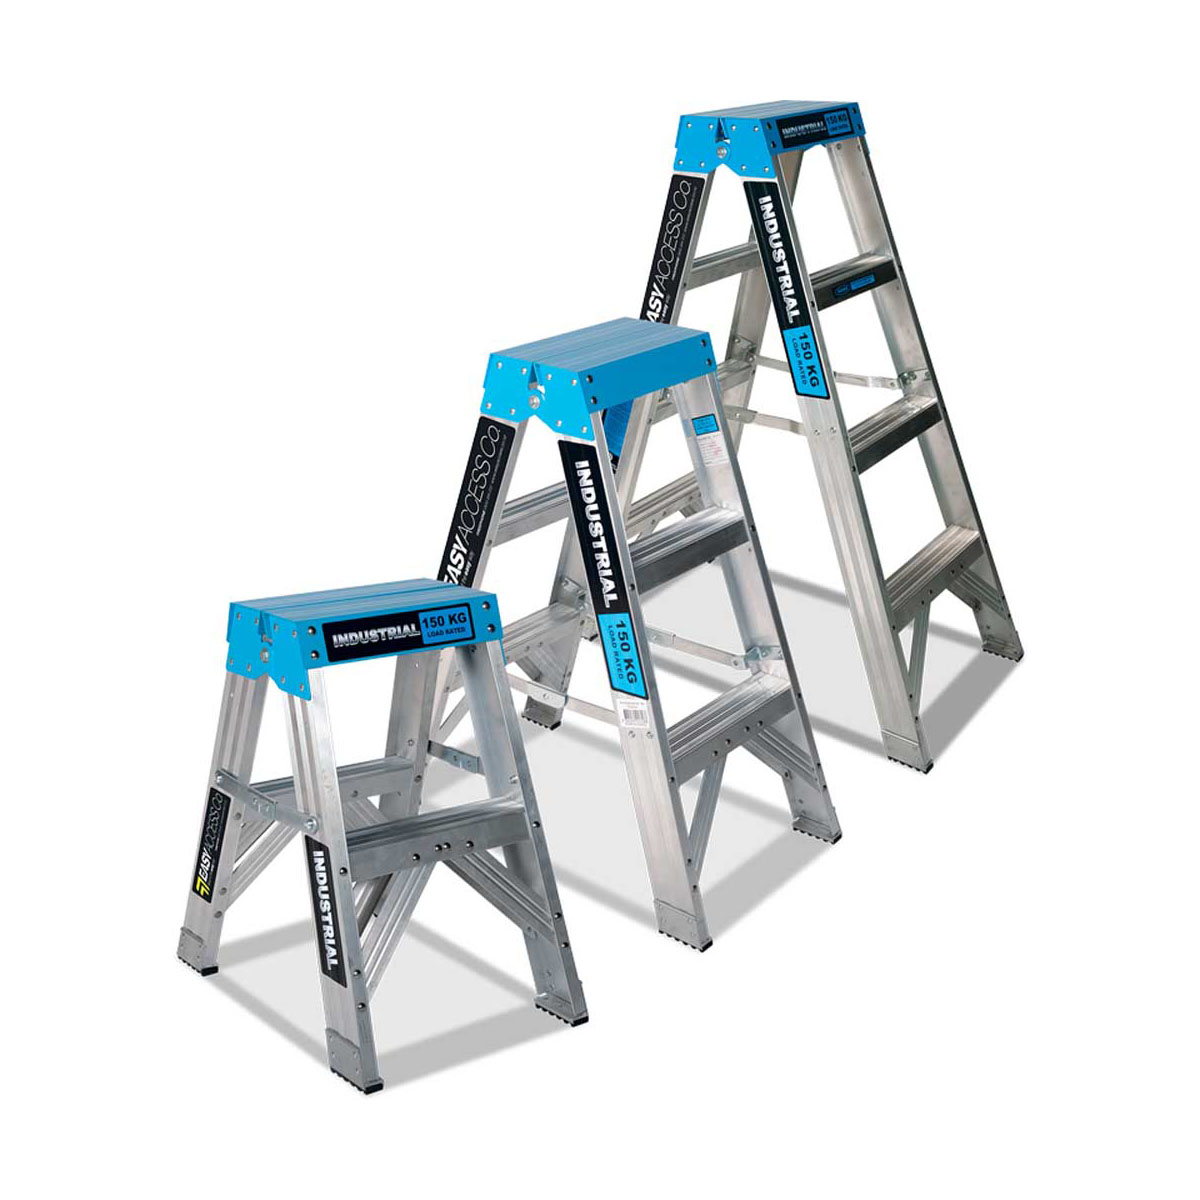 Buy Step Ladders in Step Ladders from Easy Access available at Astrolift NZ